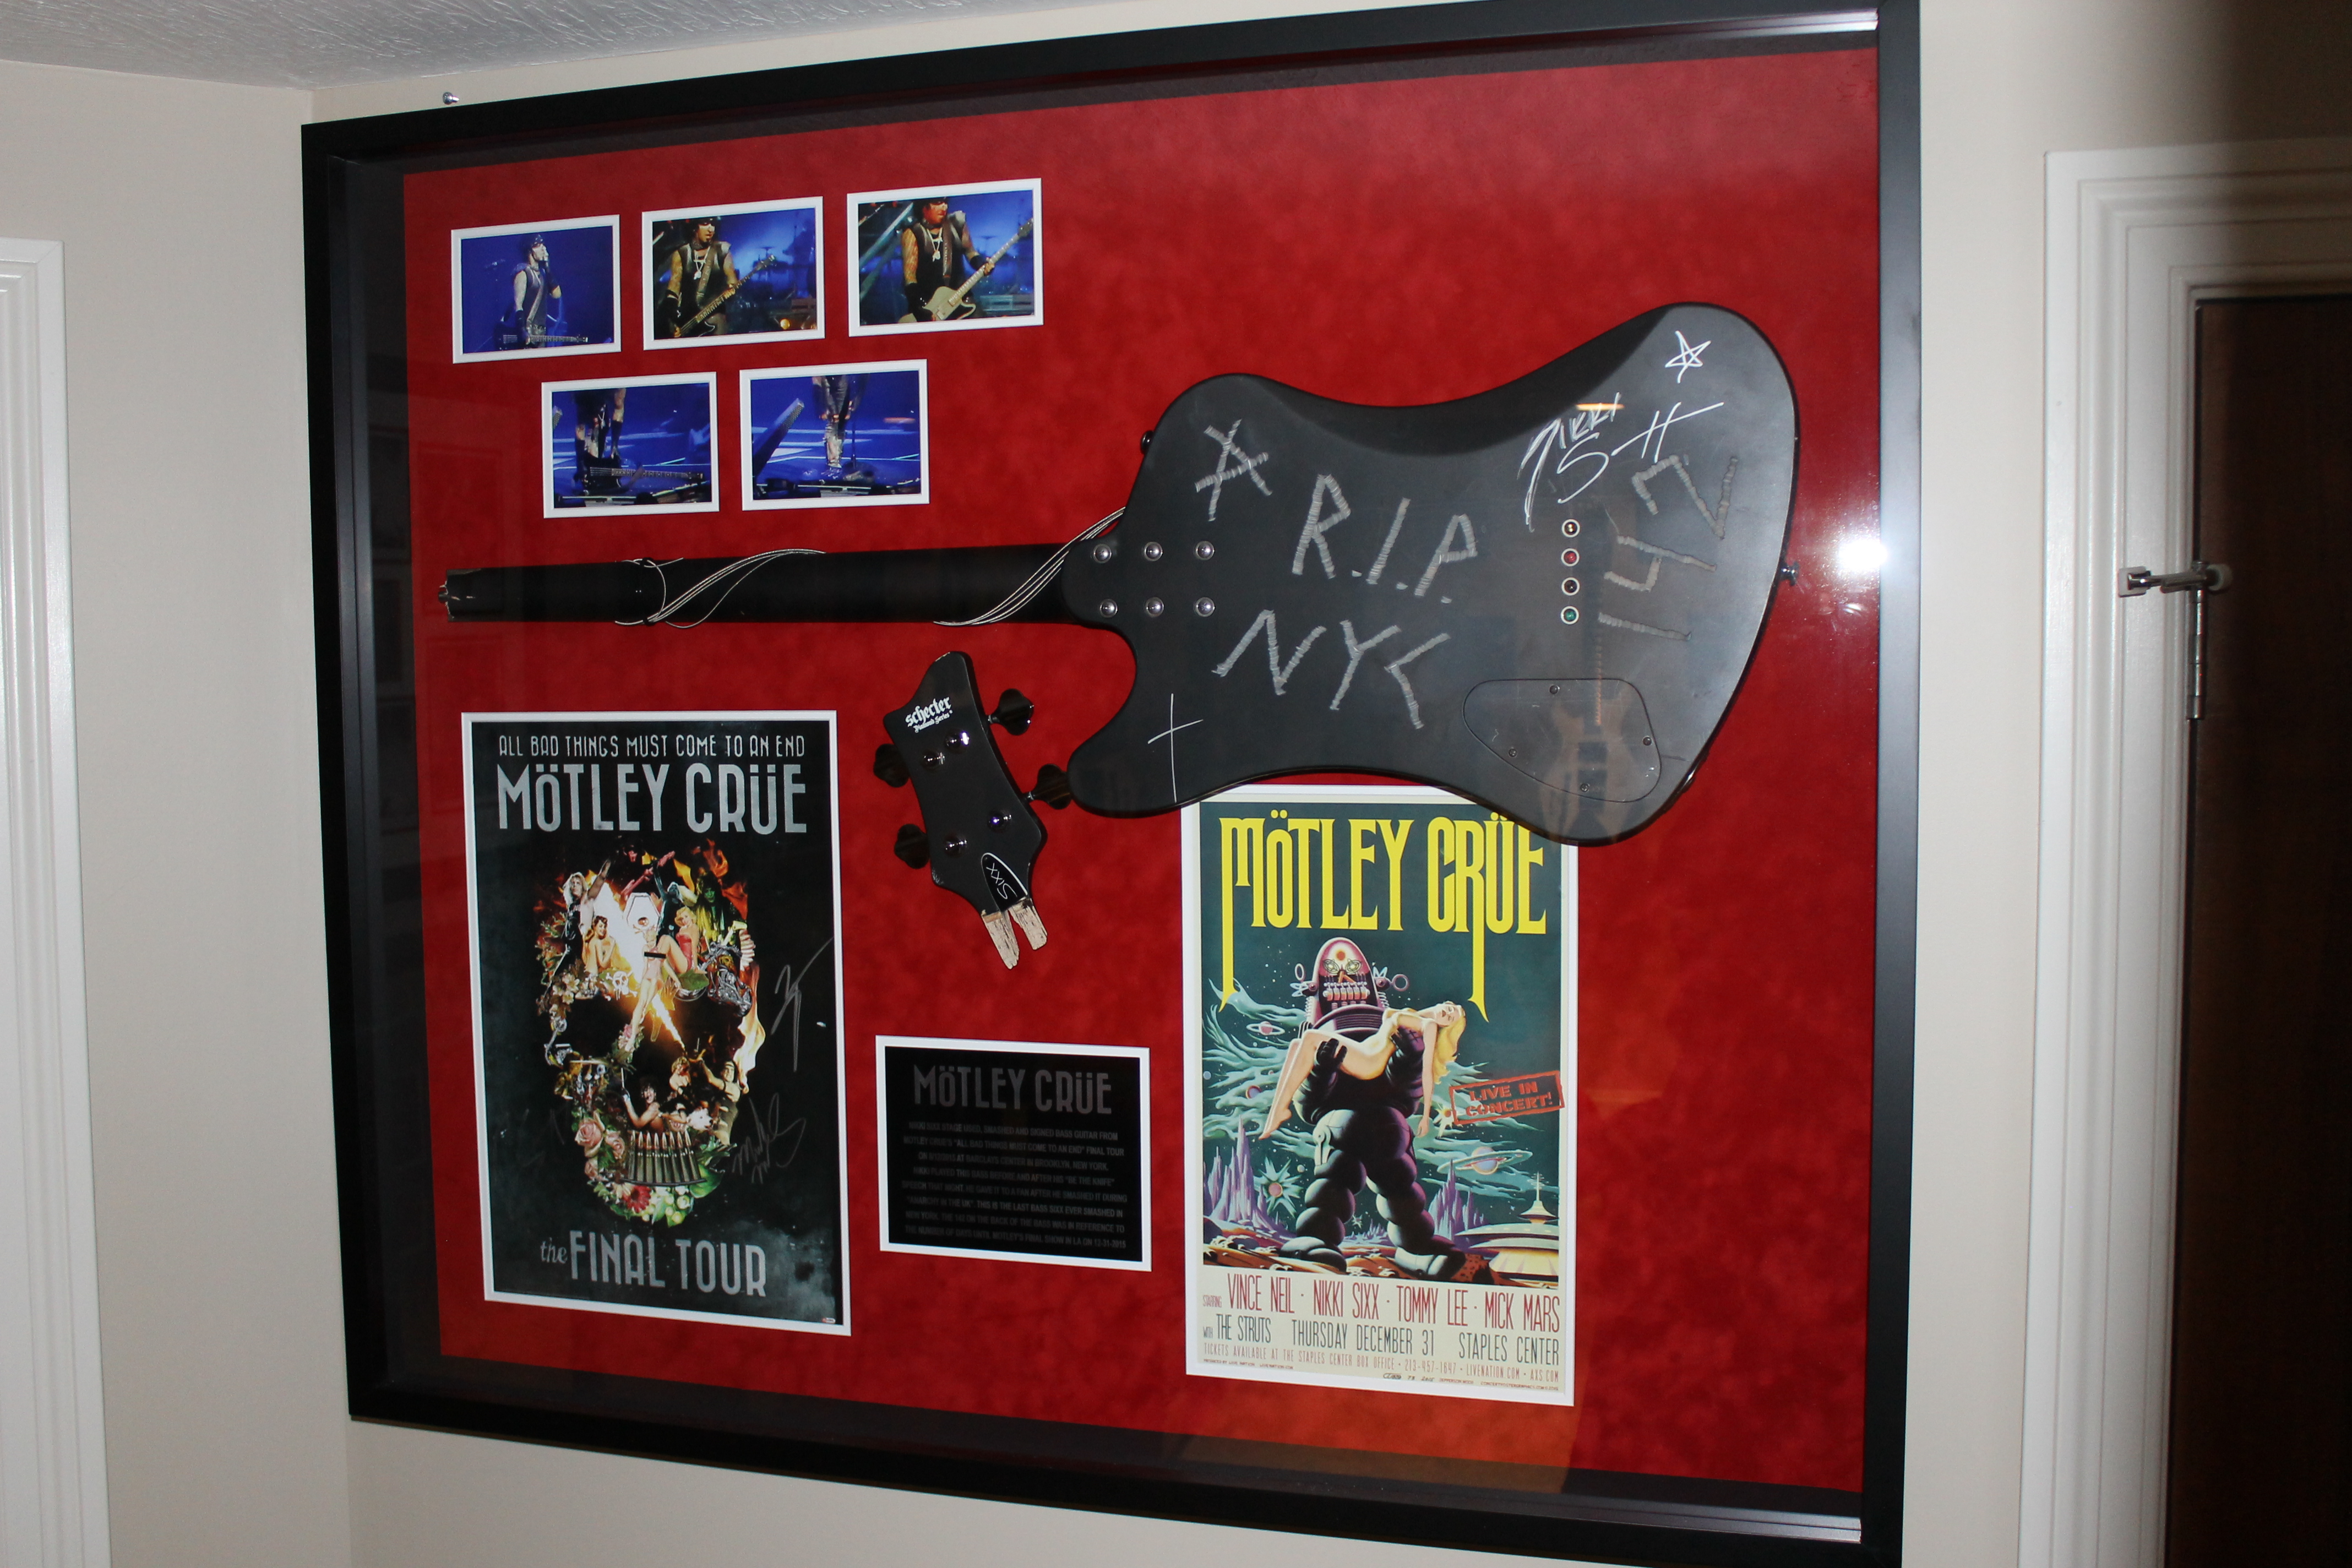 MÖTLEY CRÜE - RIP: All Bad Things Must Come To An End - Hard Rock